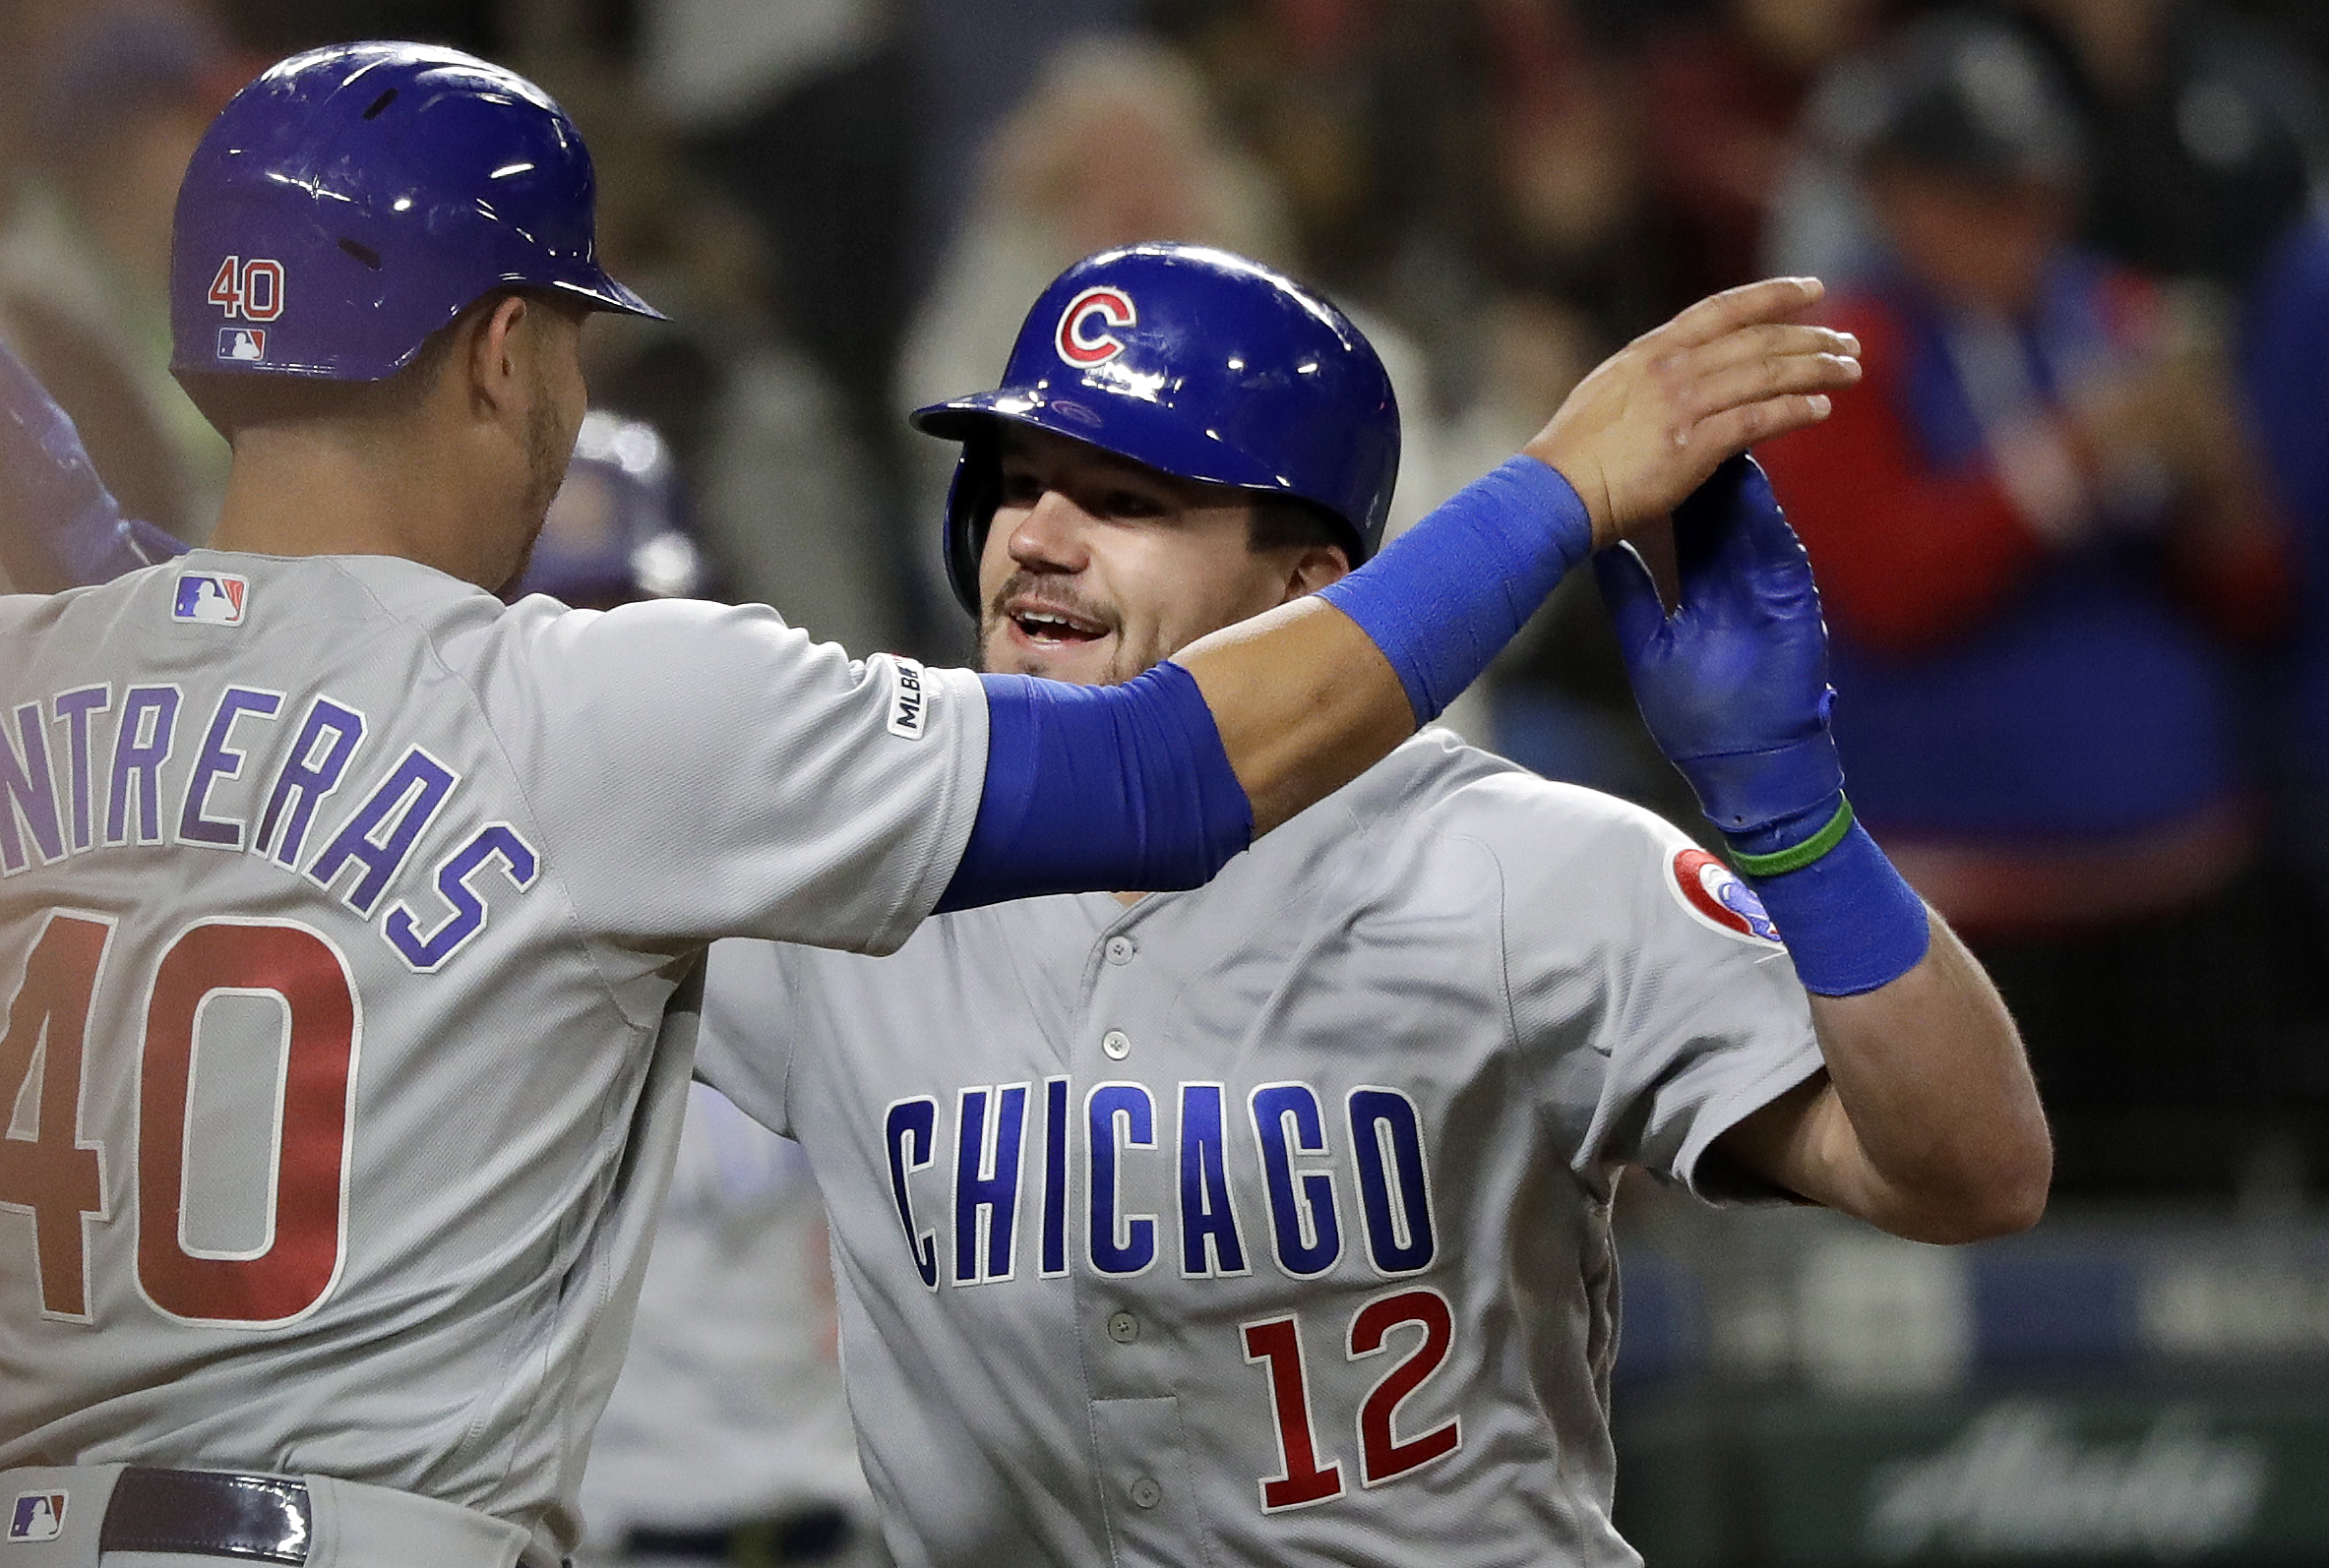 Schwarber’s homer lifts Cubs to 6-5 win over Mariners